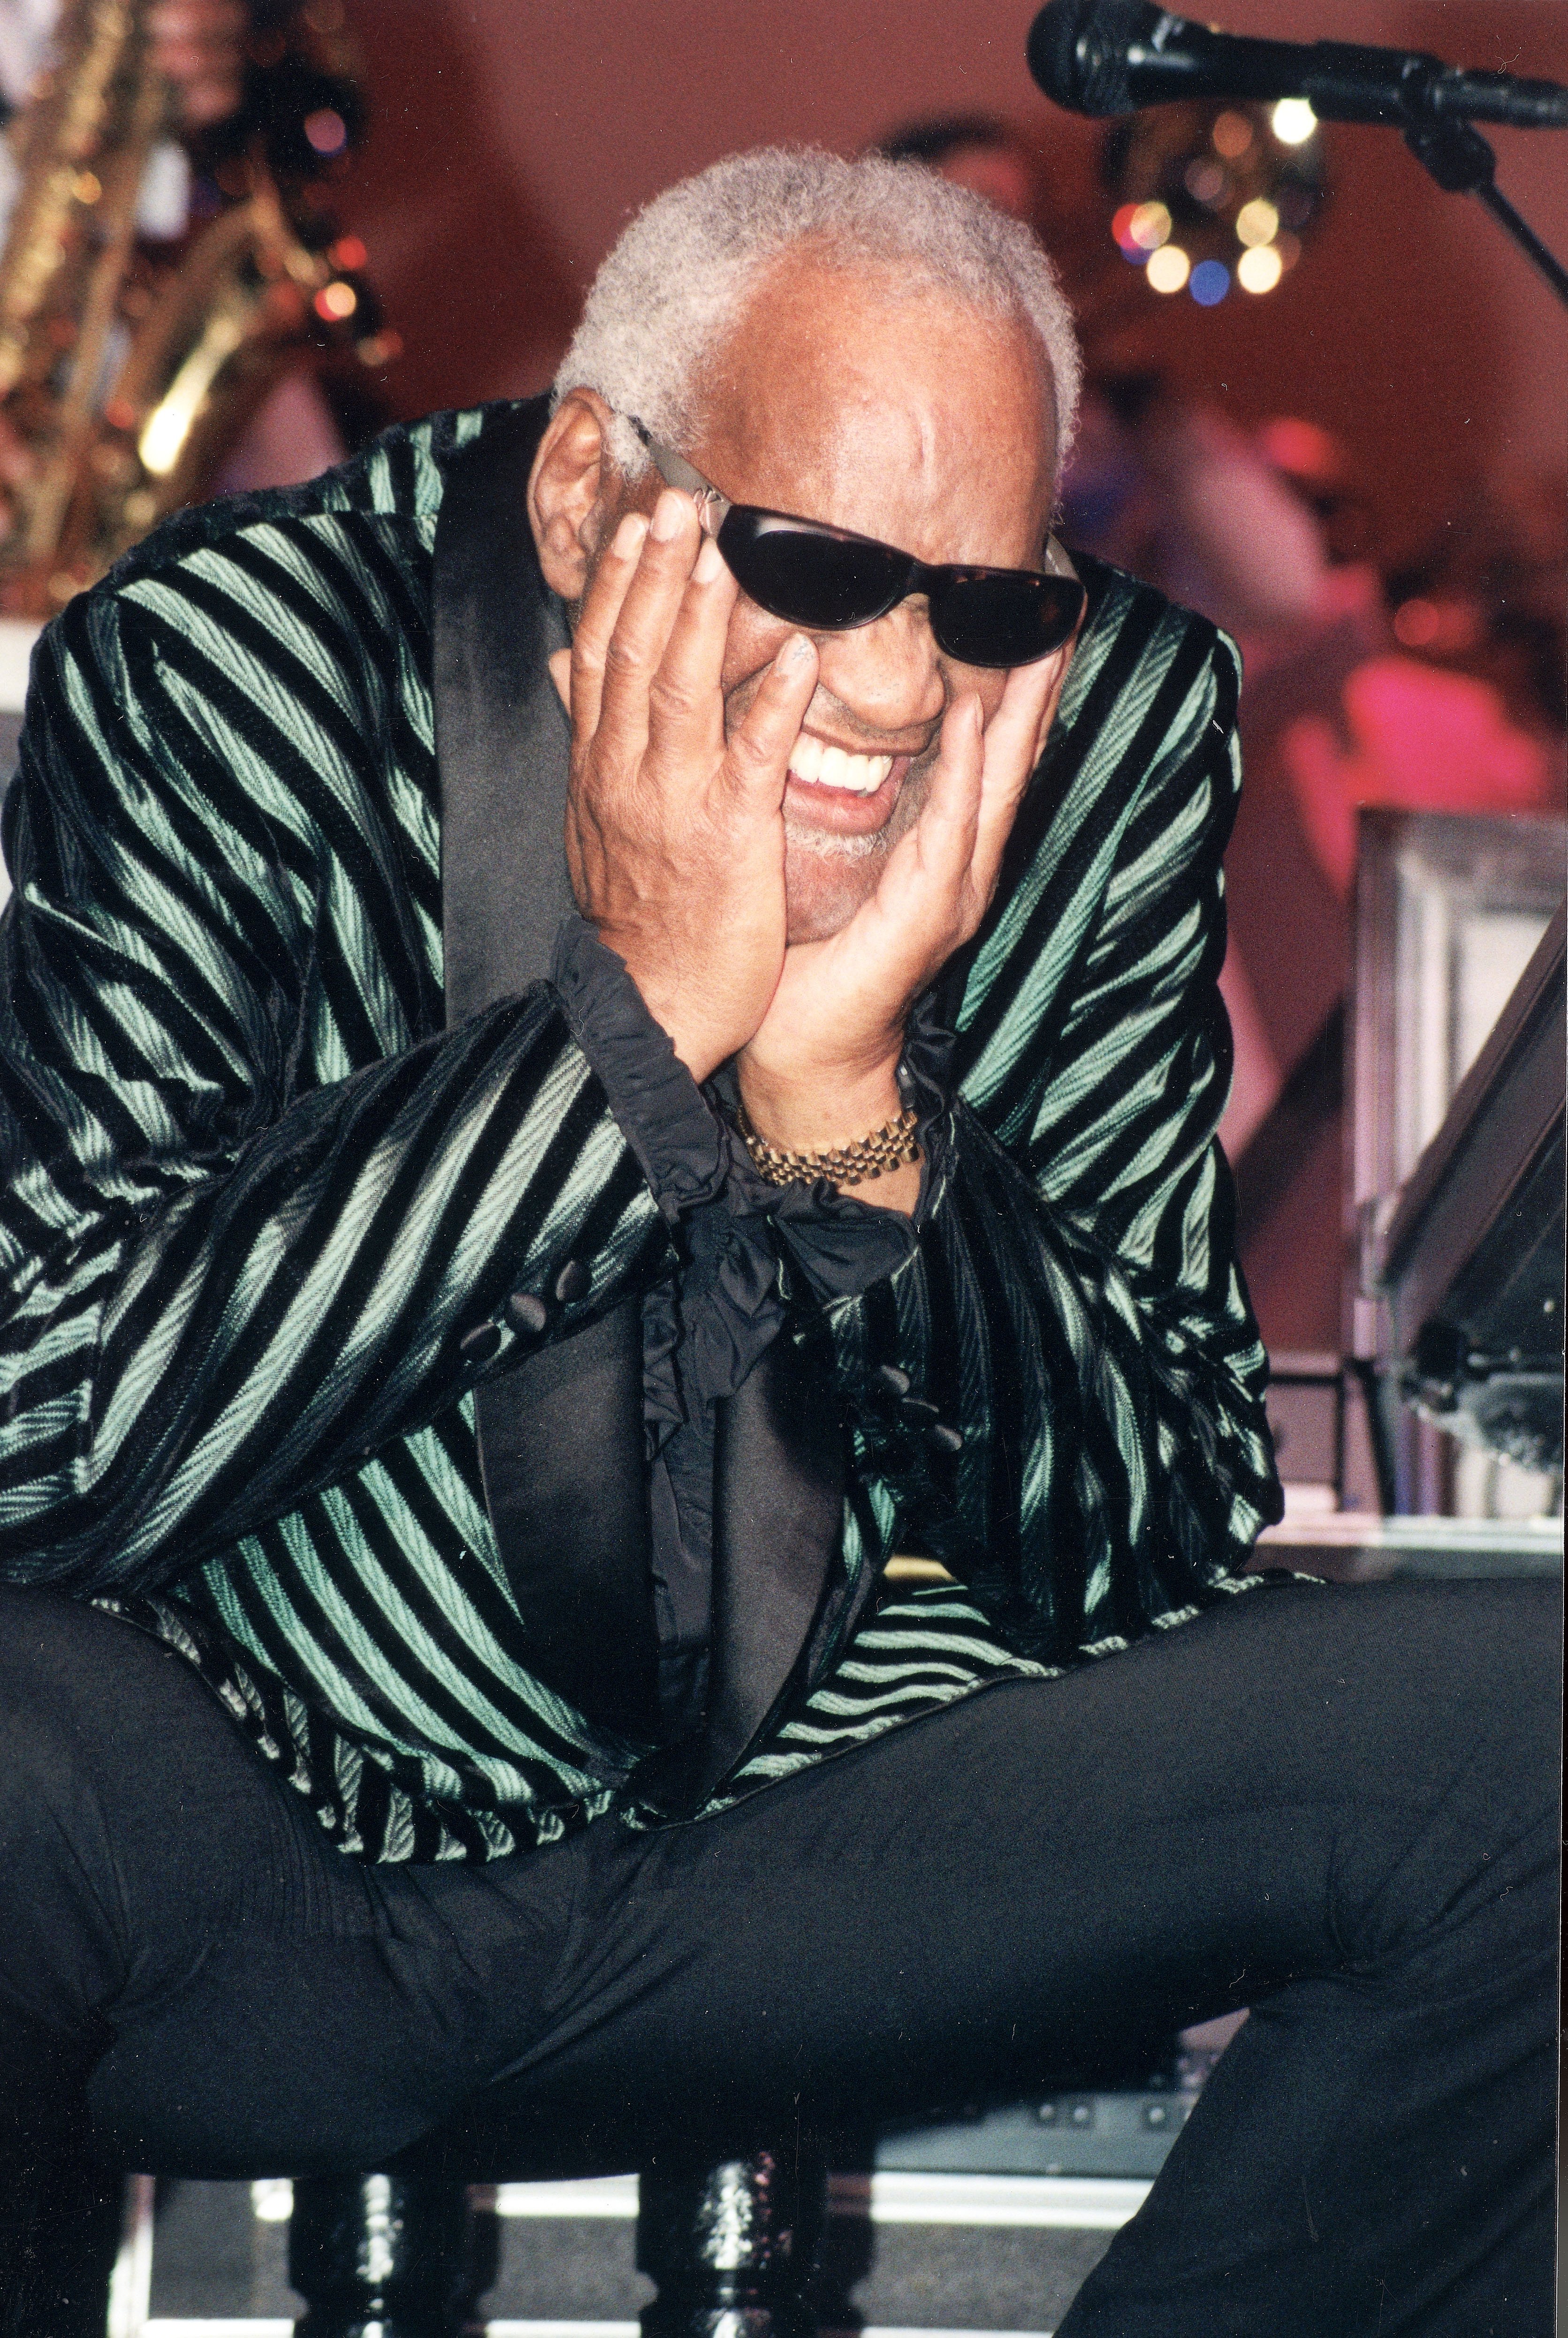 American singer Ray Charles performing in a concert at the Orleans Hotel and Casino, Las Vegas, Nevada, October 1, 1999. | Source: Getty Images